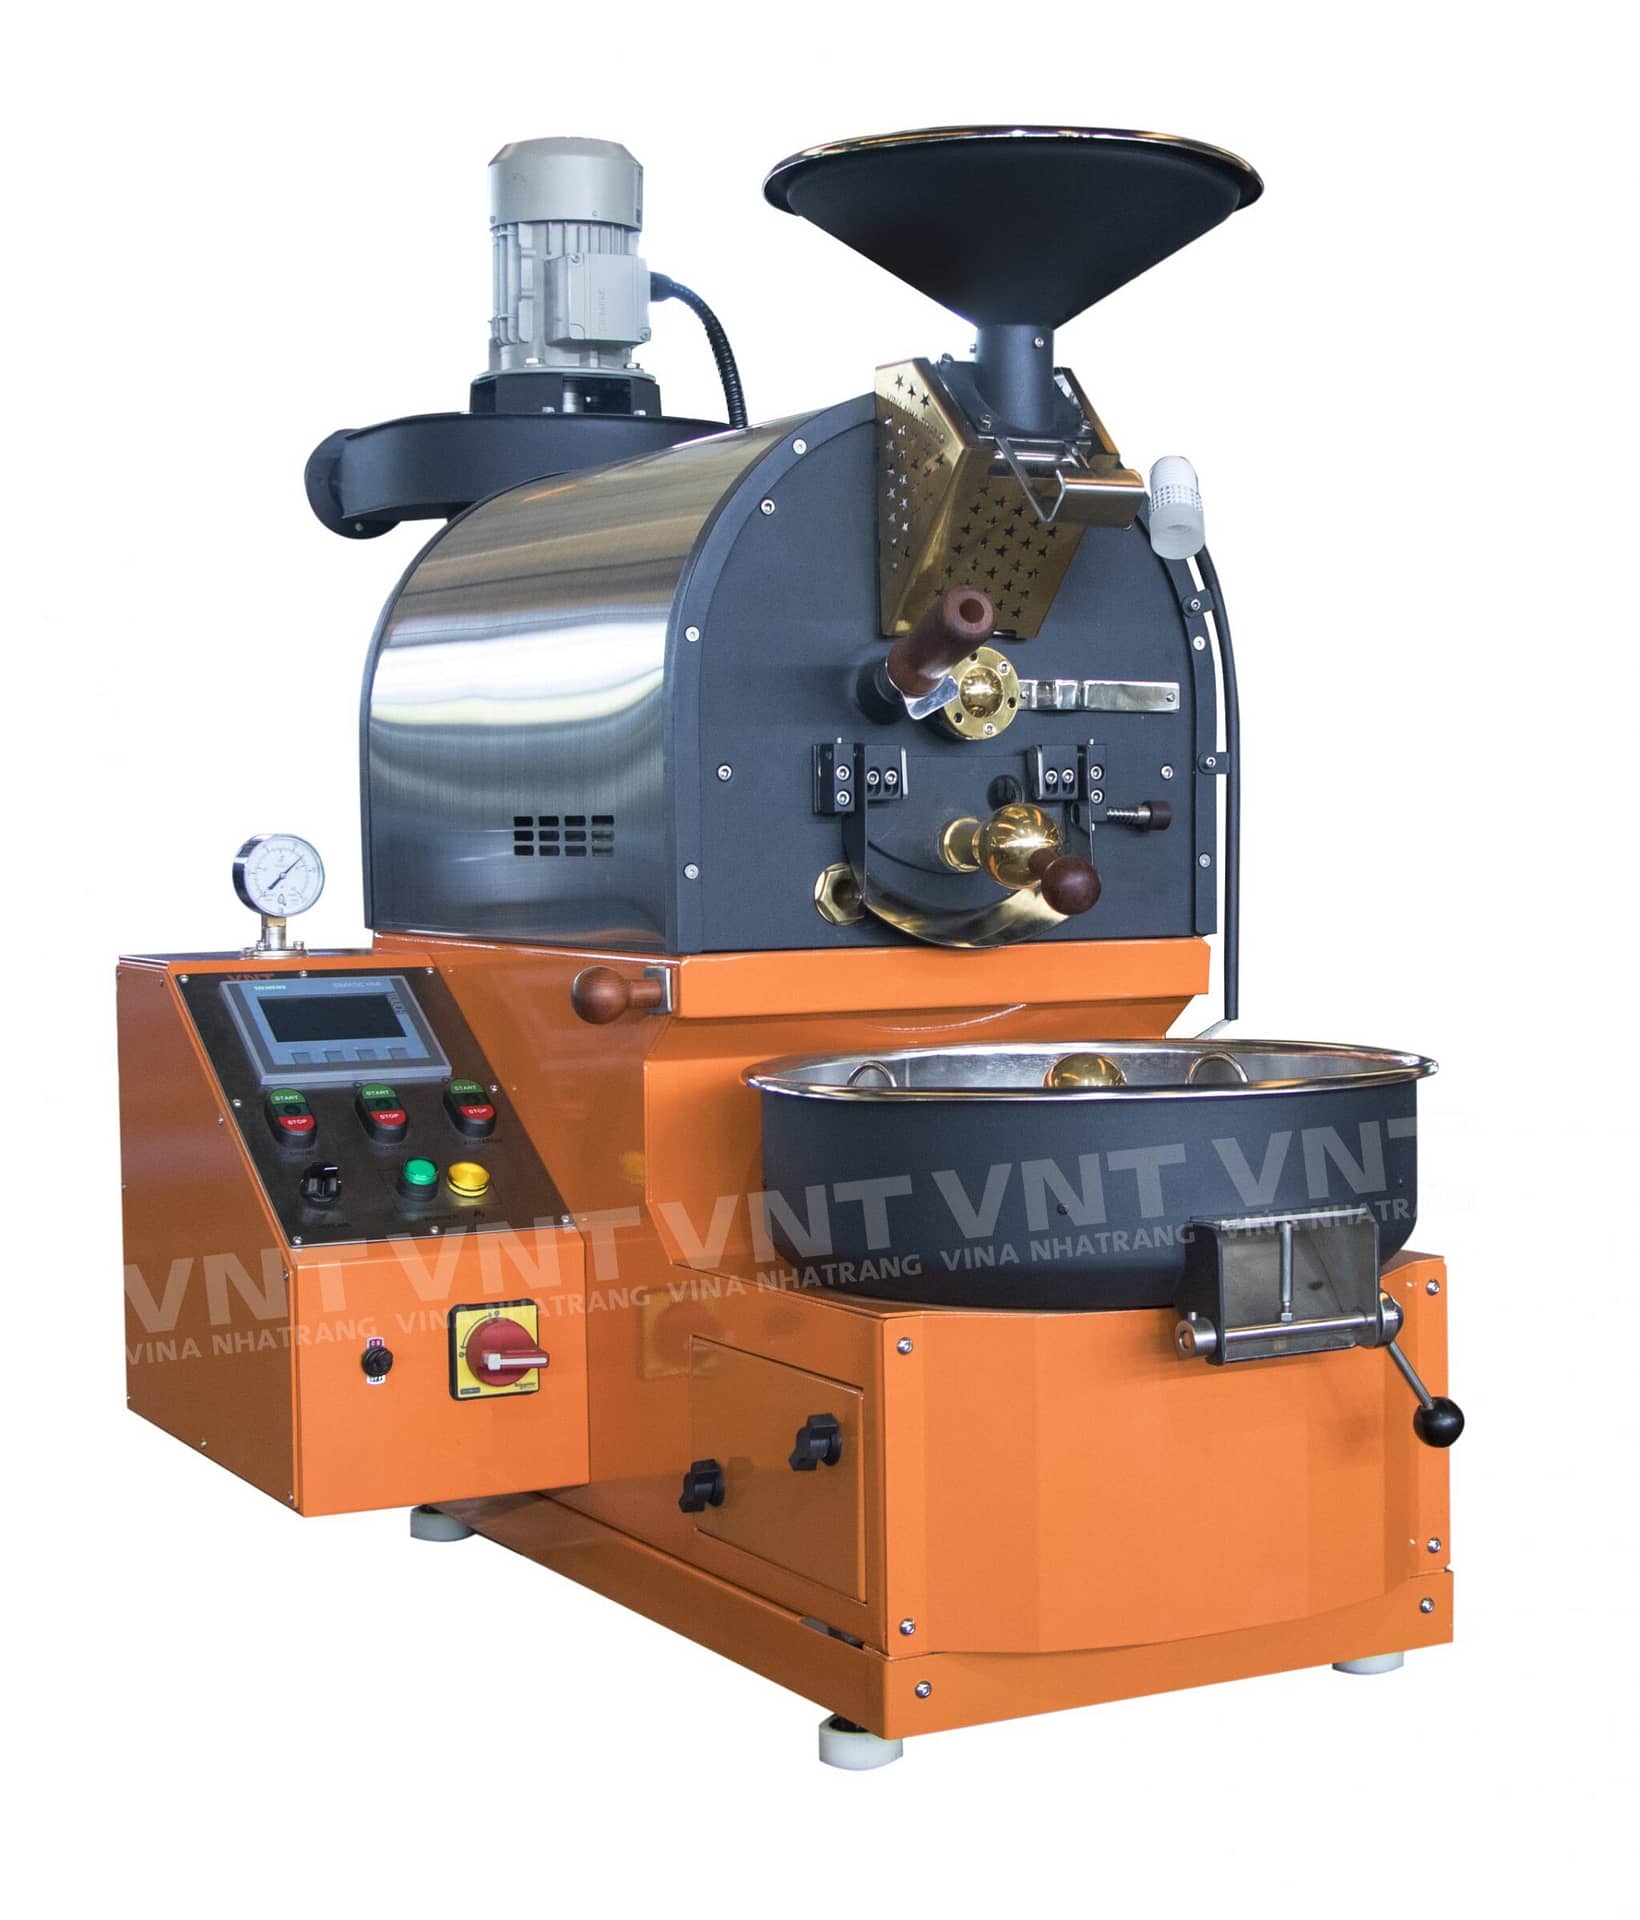 VNT's Commercial Coffee Roaster with small batch size (1KG)